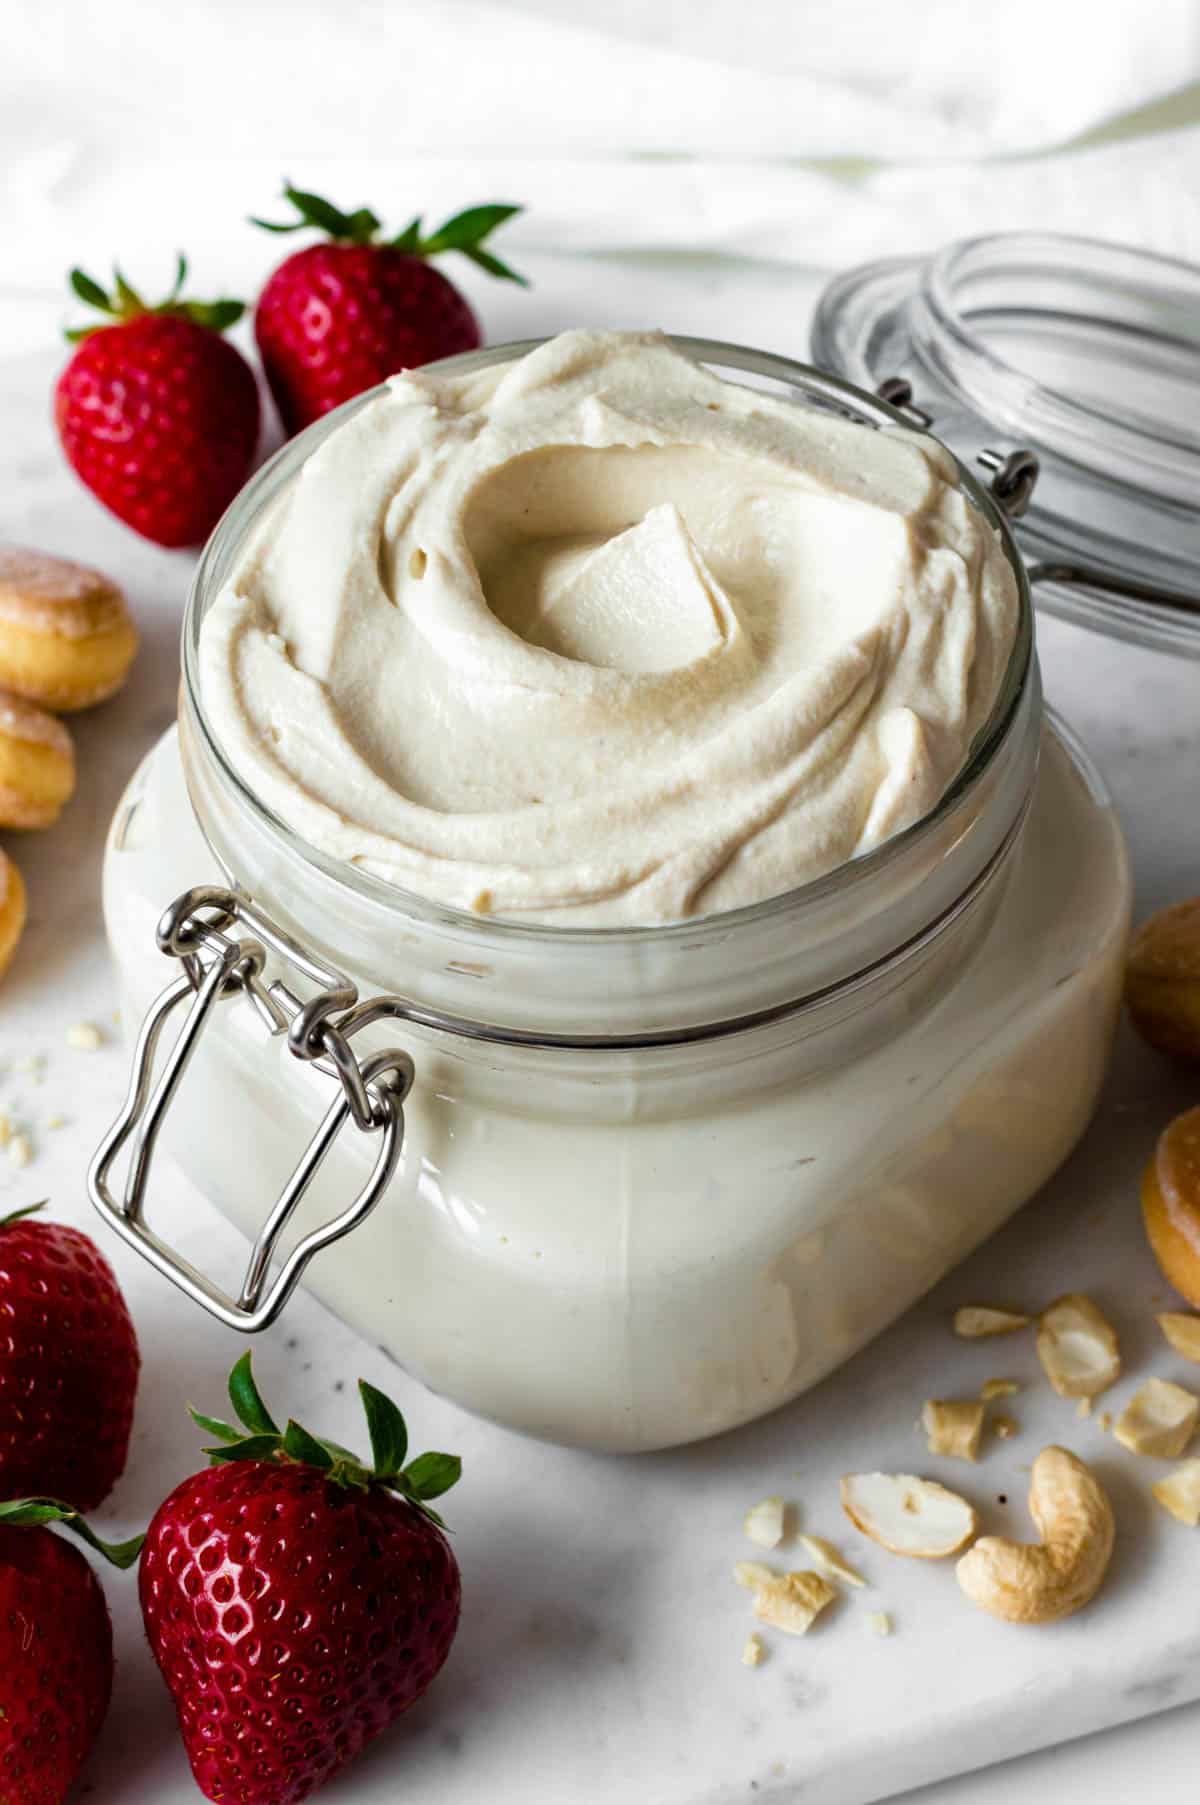 Vegan mascarpone served in a jar, placed next to strawberries, crushed cashews, and ladyfingers.